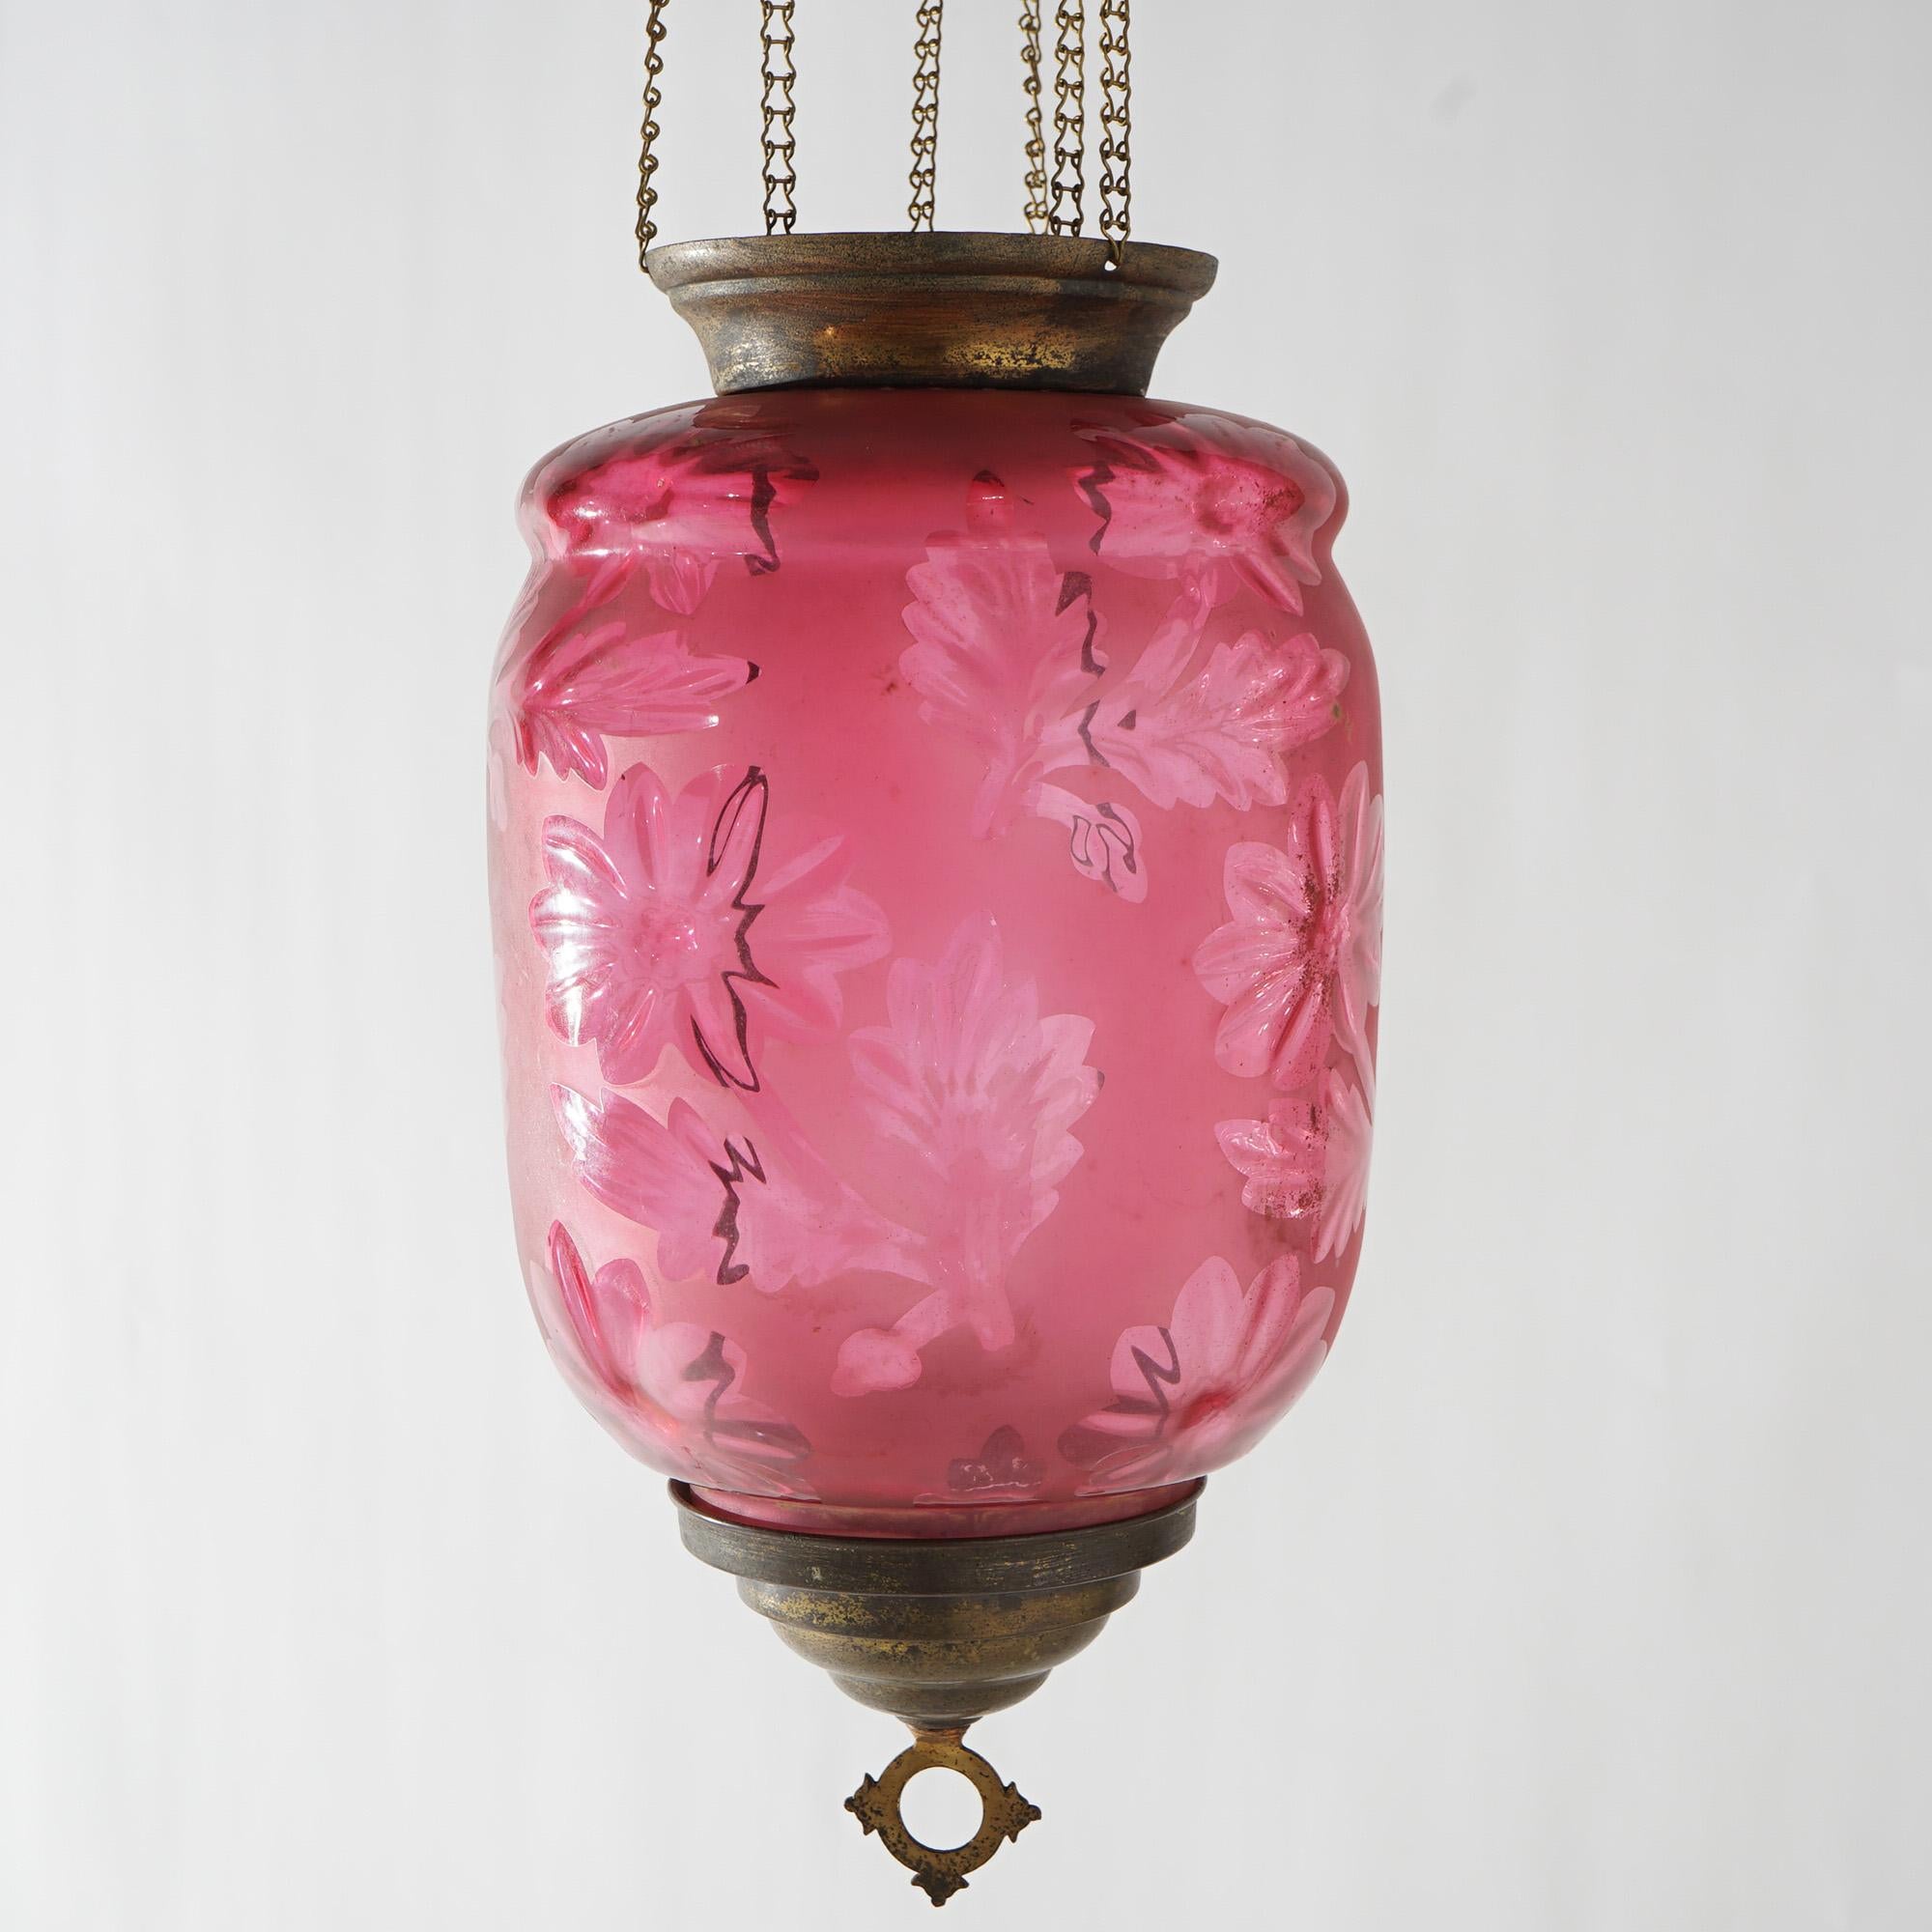 An antique Victorian hanging pendant hall light offers brass frame with cut to clear cranberry glass shade with flowers, c1880

Measures - 31